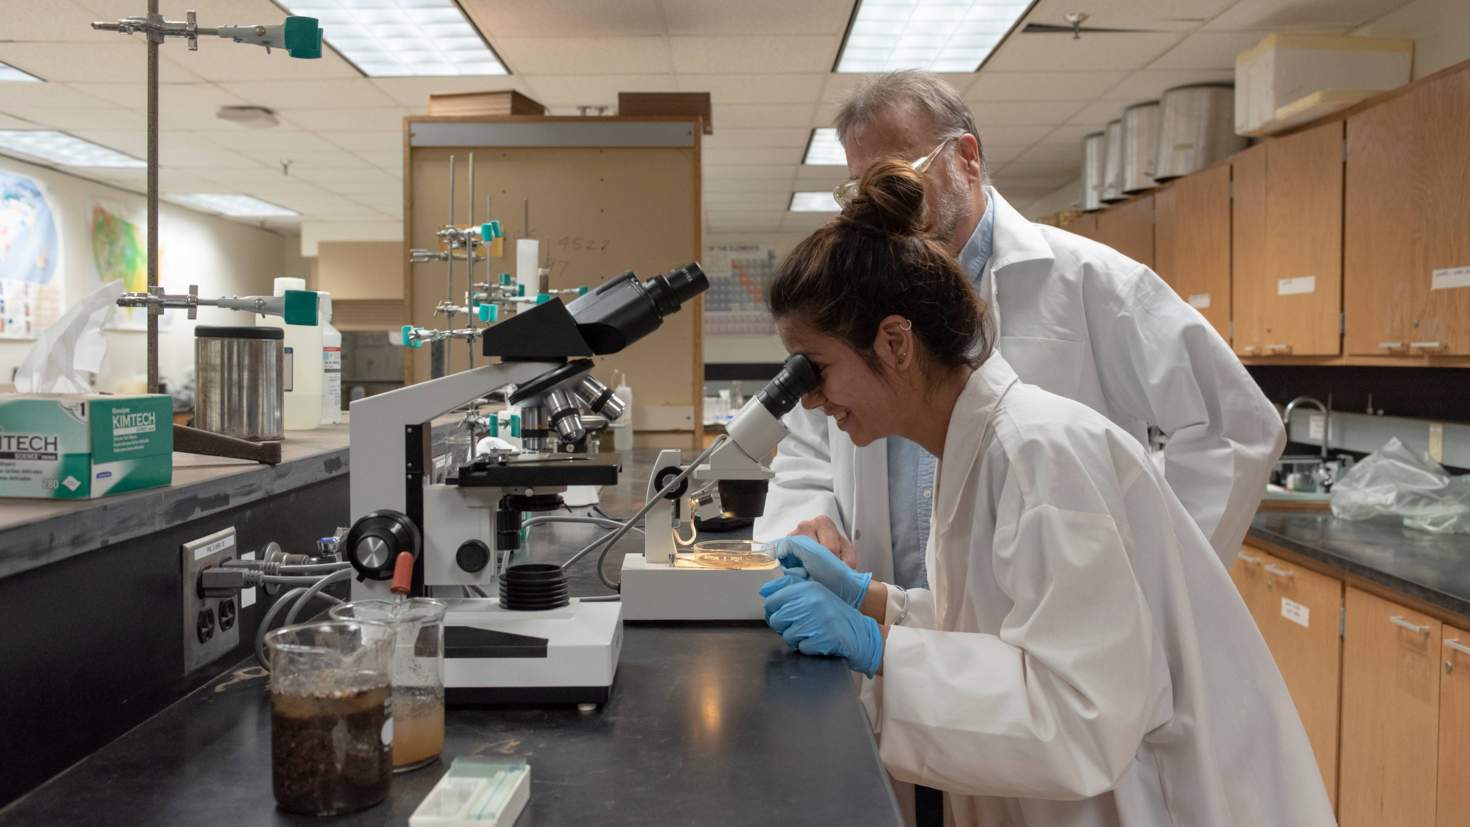 student and faculty member in lab working with microscope